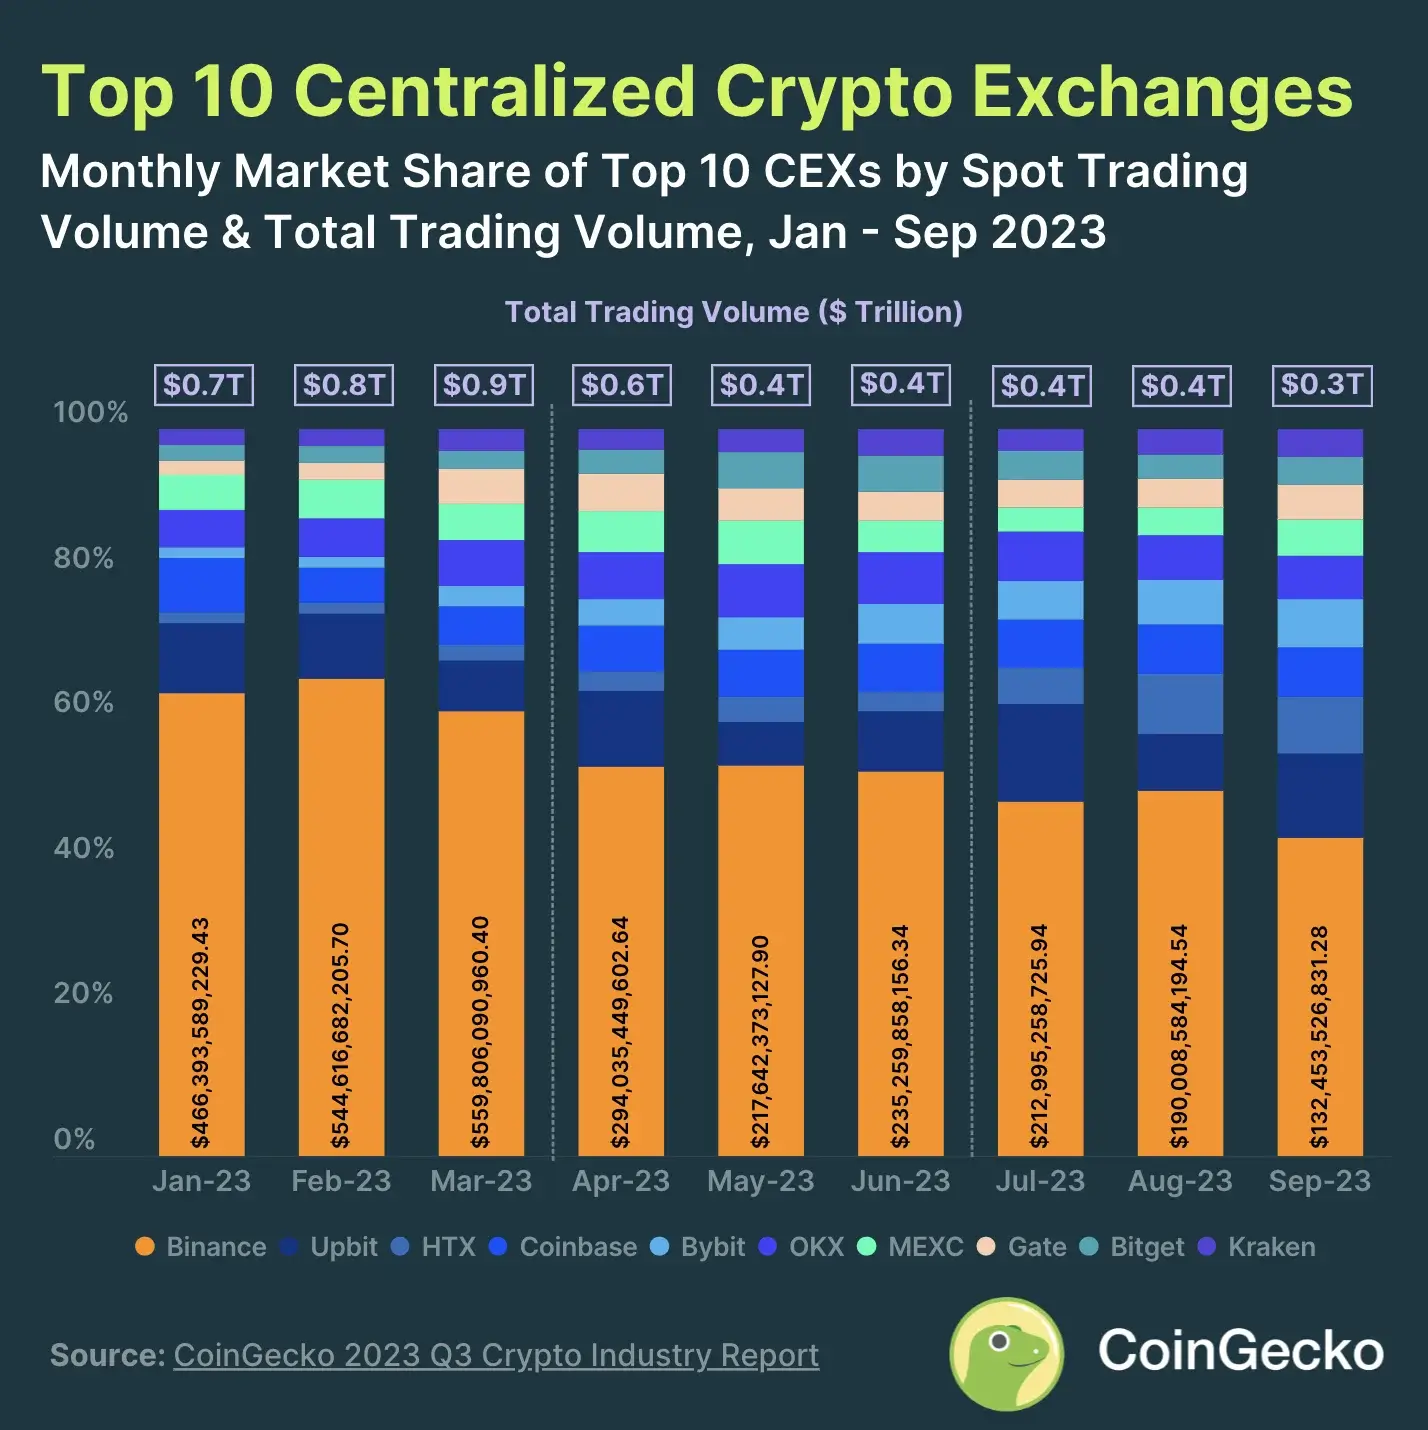 Top 10 Centralized Exchanges